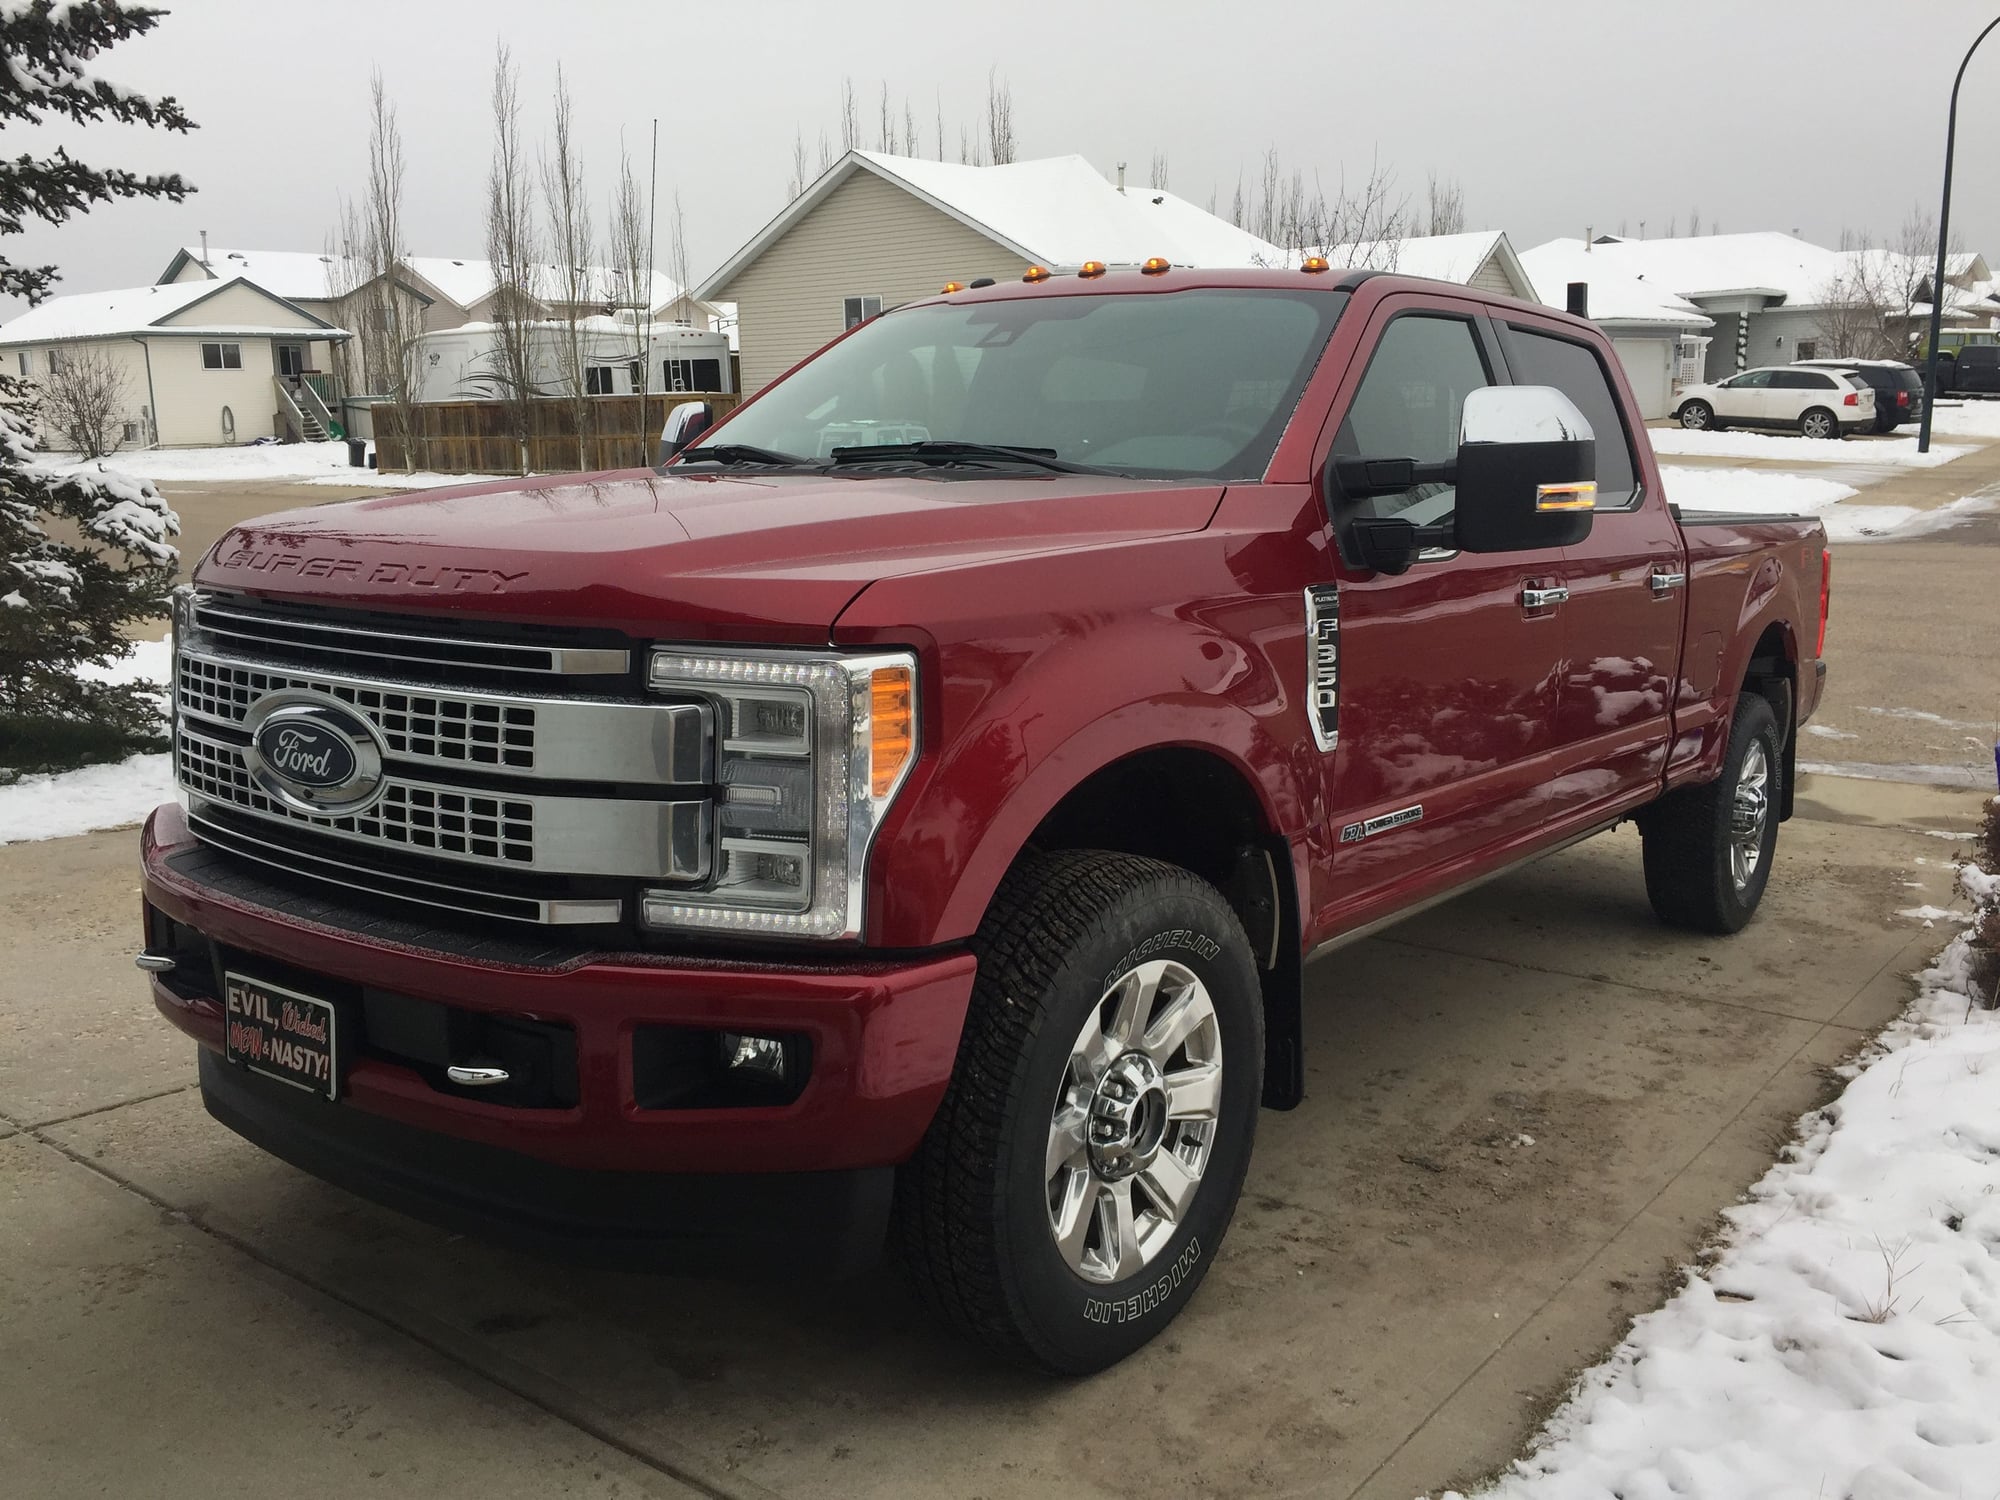 2017 Ford F-350 Super Duty - 2017 F350 6.7, Ruby Red, Loaded, Platinum, Ultimate. - Used - VIN 1ft8w3bt4heb54705 - 8 cyl - 4WD - Automatic - Truck - Red - Red Deer, AB T4R2W9, Canada